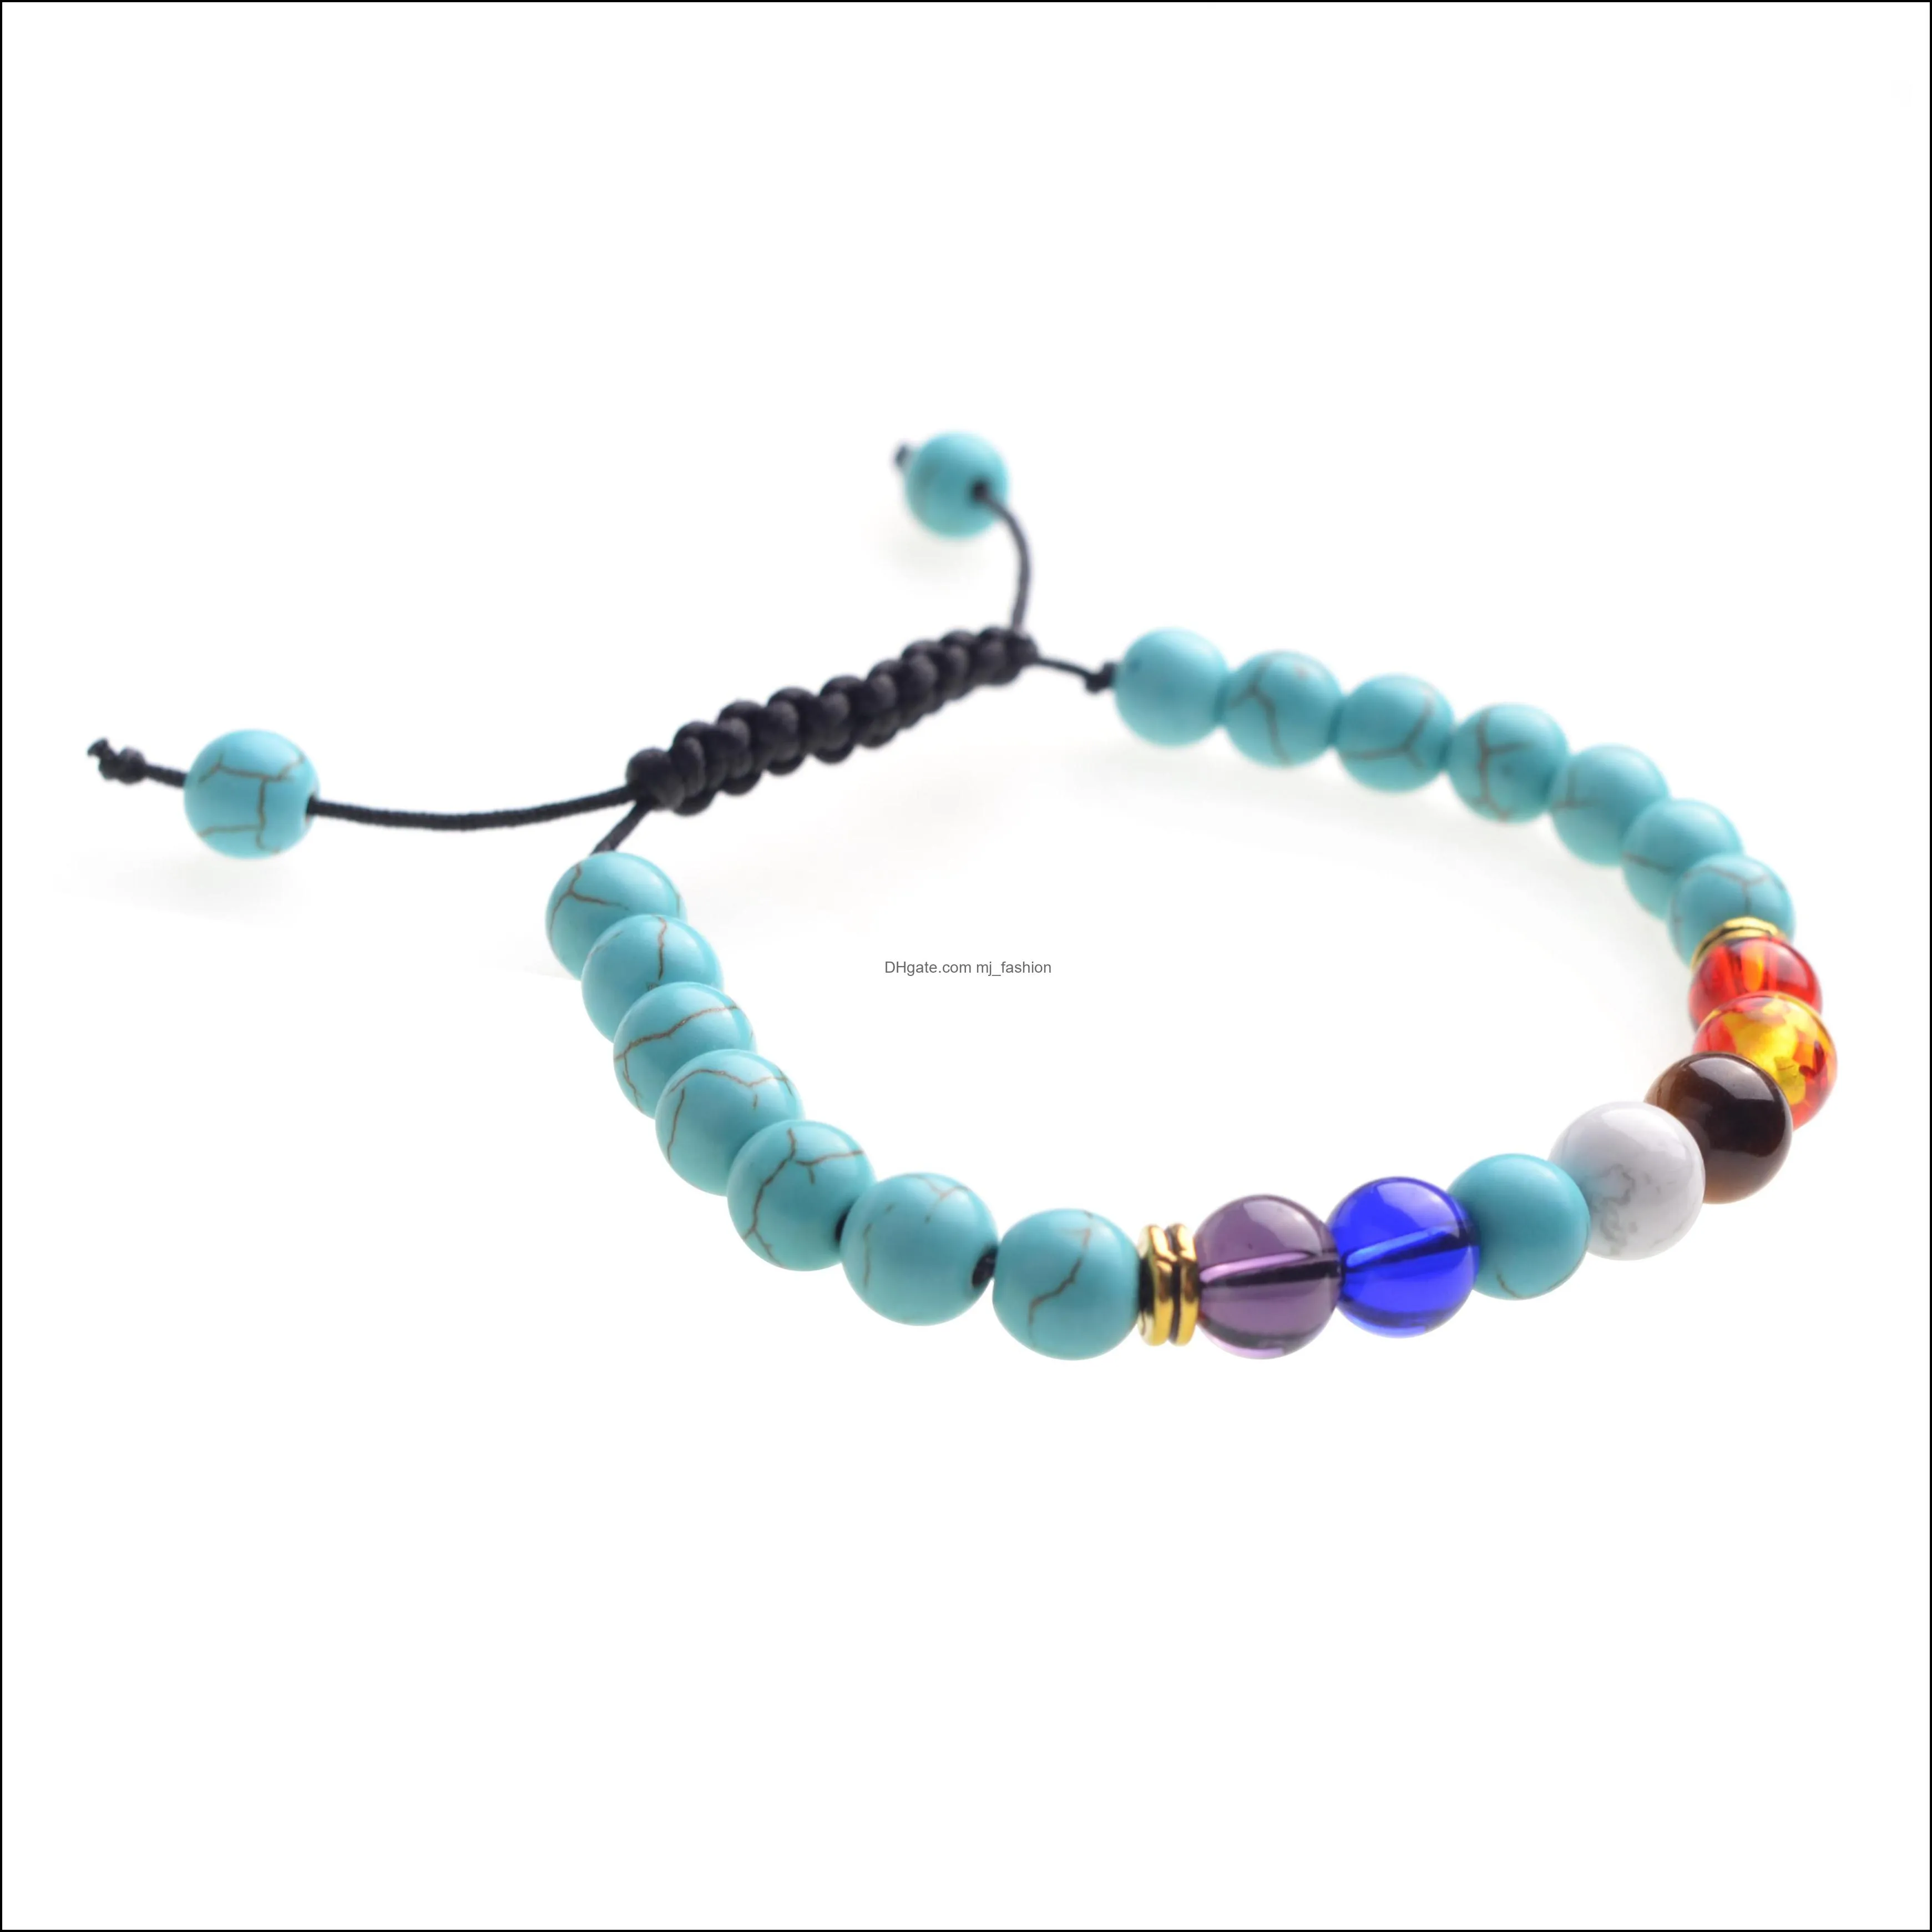 factory sale handmade lucky turquoise woven 7 chakra adjustable natural stone bracelet with 8mm round beads for unisex wholesale